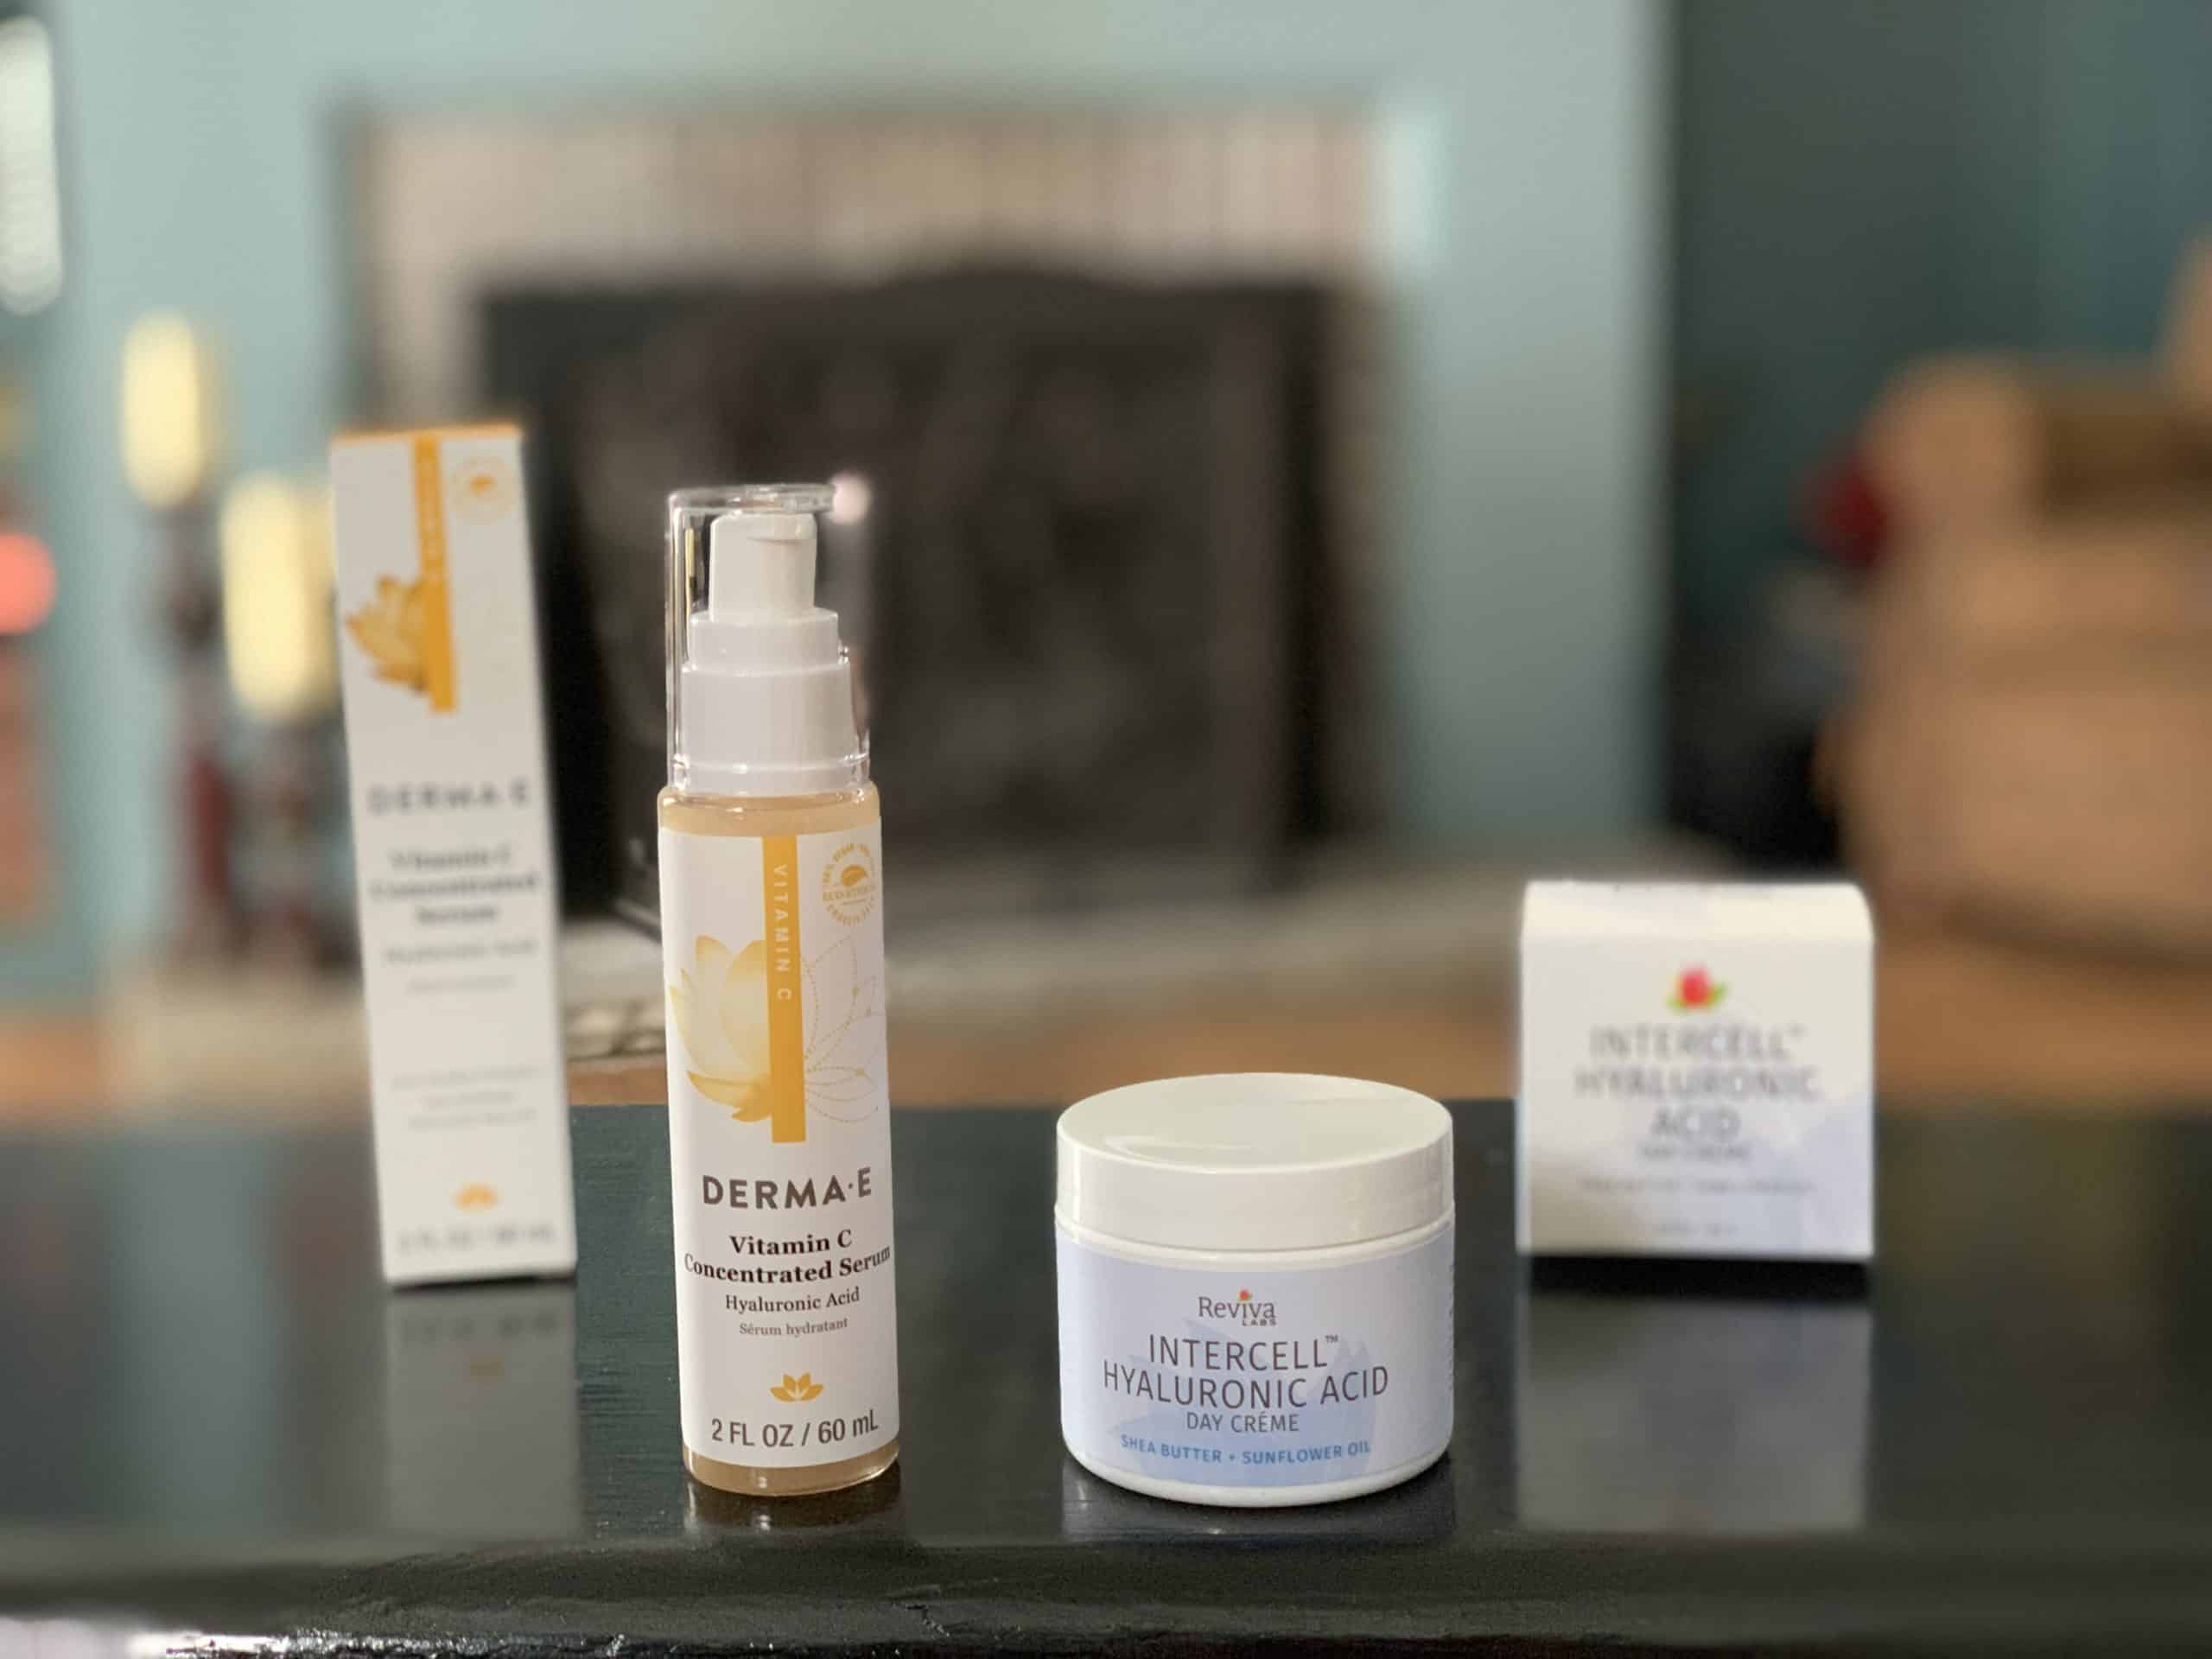 products to make your life easier in 2022 - Reviva skincare